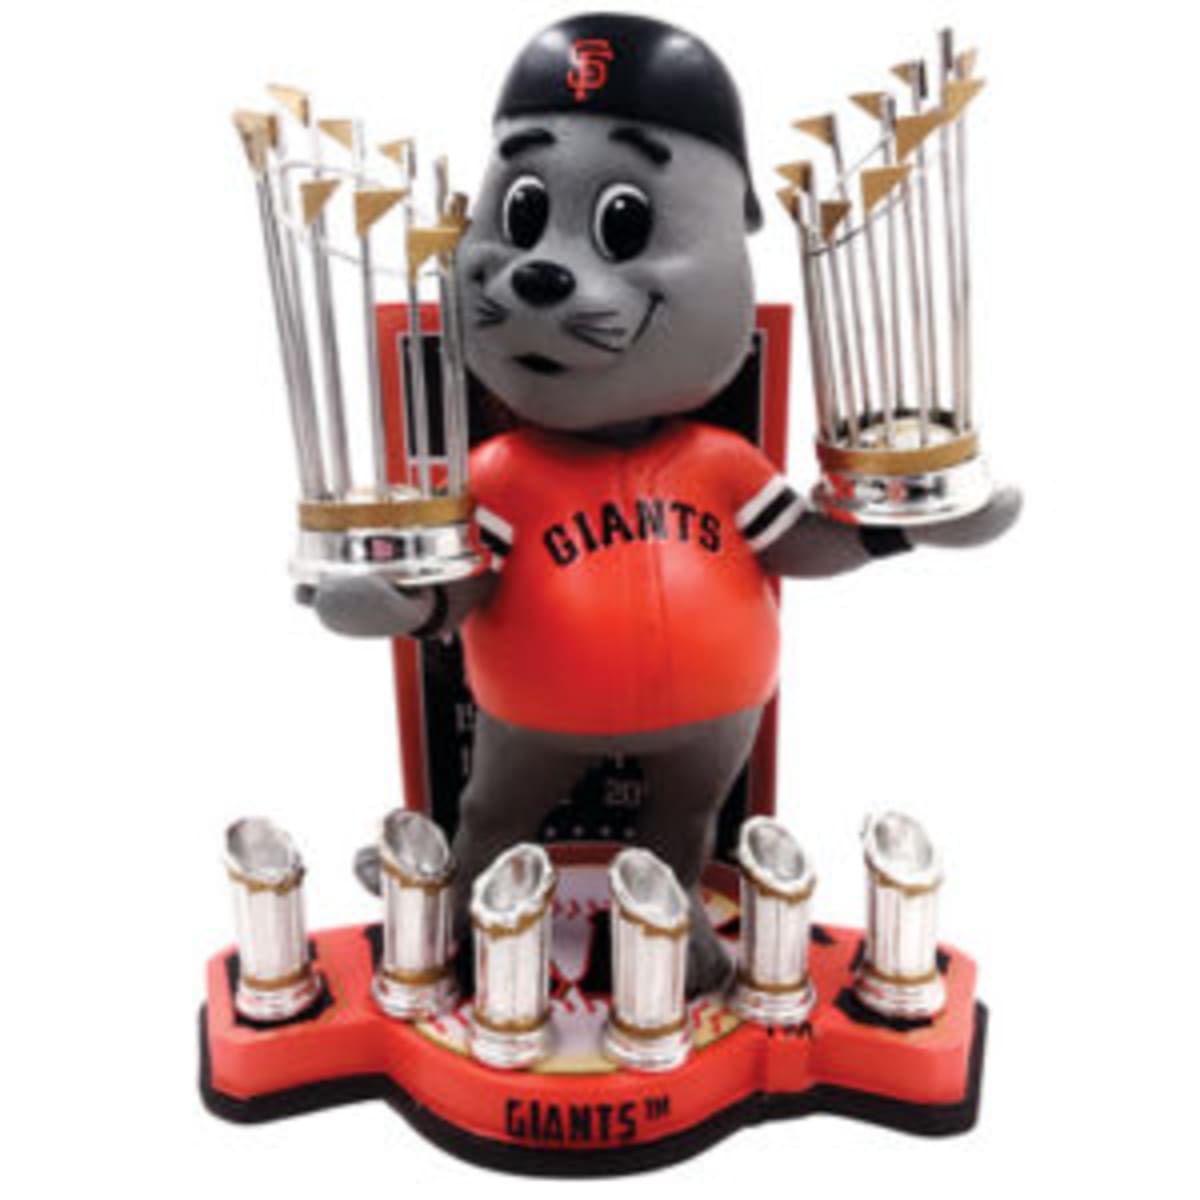 Miami Marlins MLB World Series Champions Series - Numbered to 1,000 Bobblehead